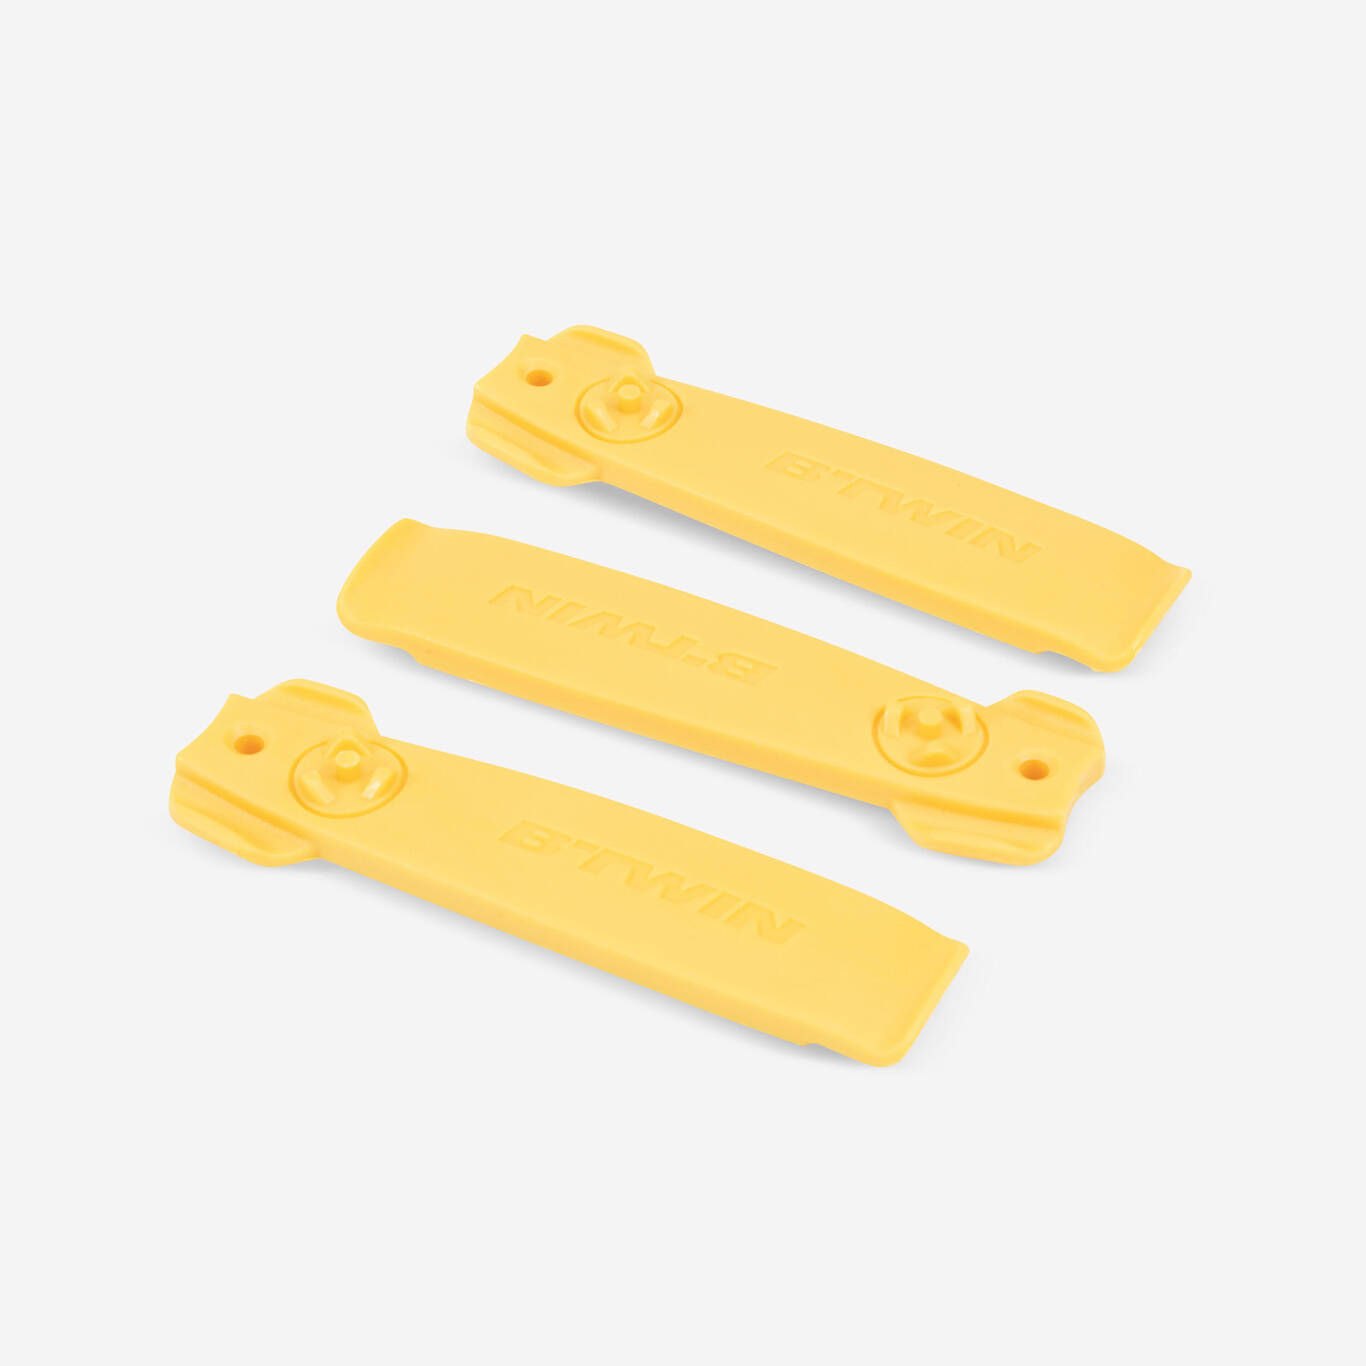 https://contents.mediadecathlon.com/p1757887/k$c5c8f16ab6c7a2d66624b5738f43bc8e/pack-of-3-tyre-levers-yellow.jpg?format=auto&quality=70&f=1366x1366